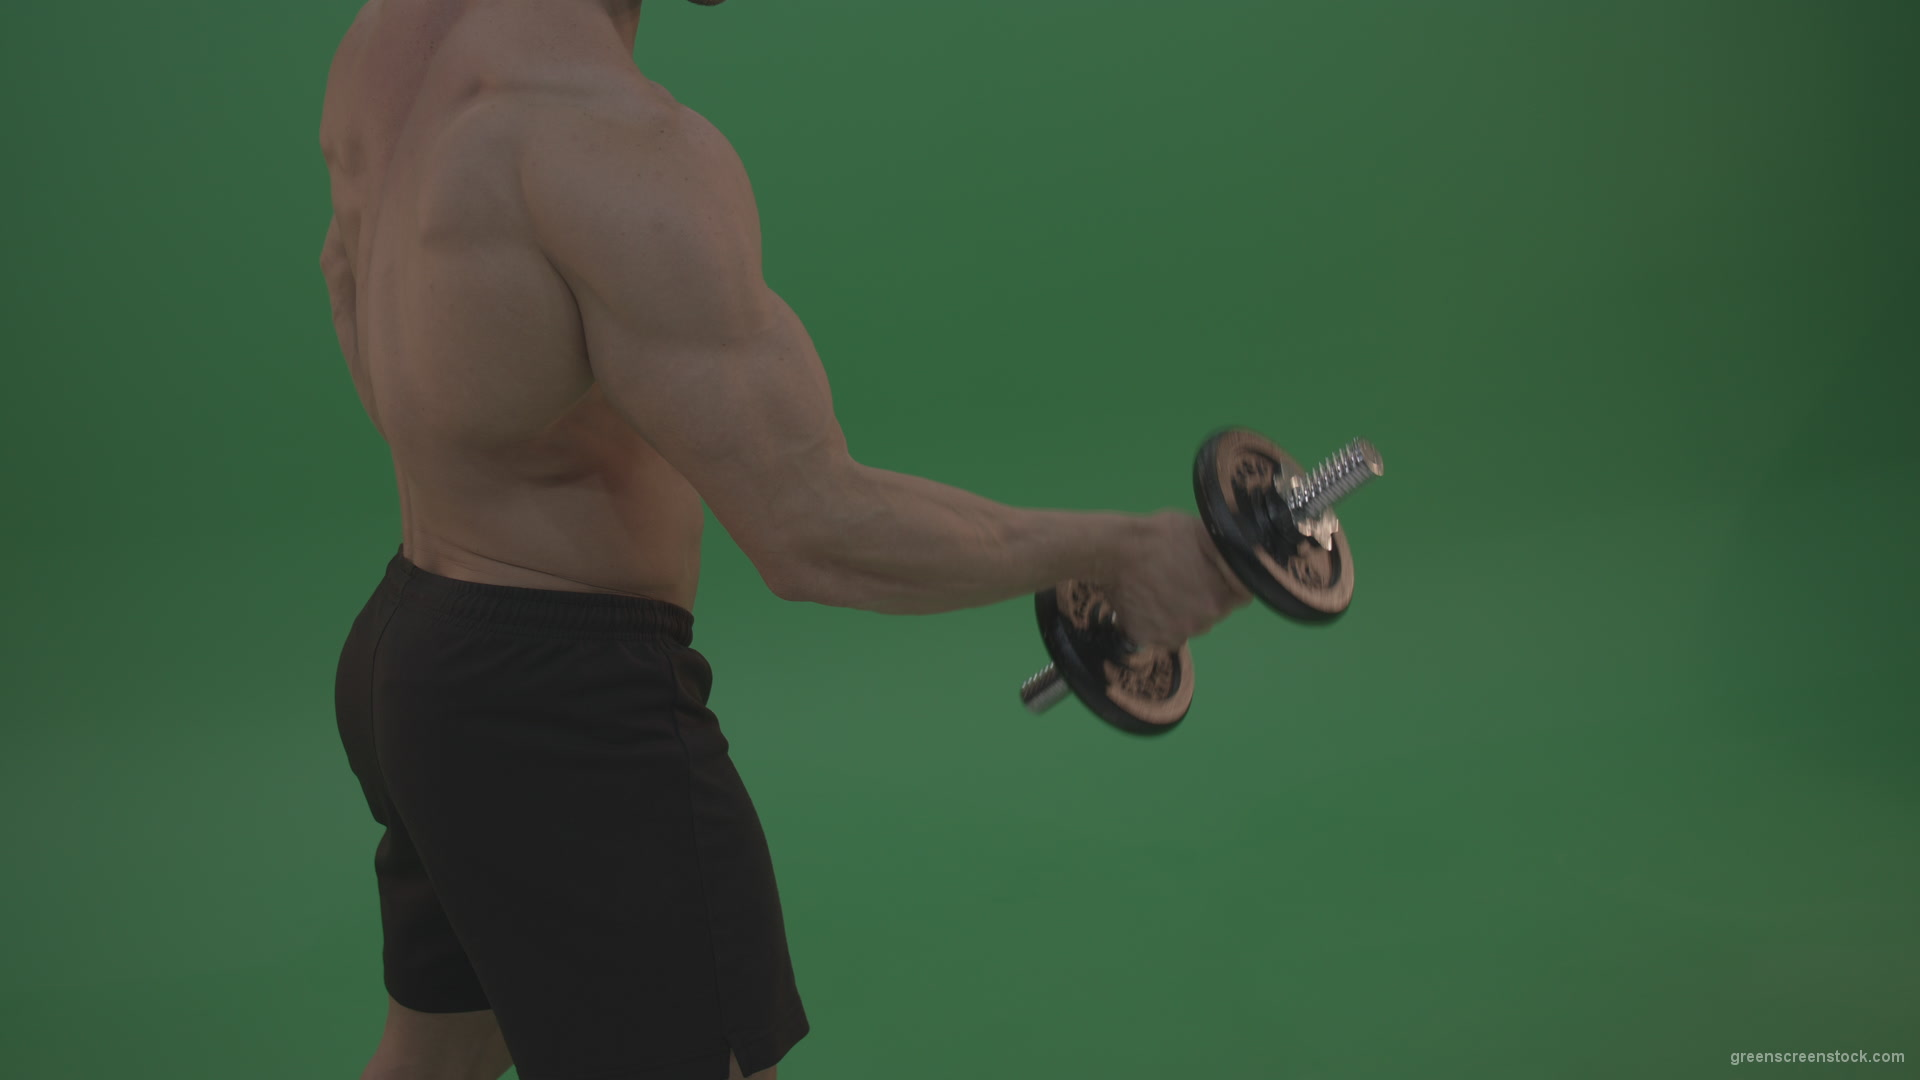 Young_Bodybuilder_Doing_Biceps_One_Hand_Excercise_With_Dumbbell_Showing_Great_Technique_On_Green_Screen_Wall_Background_006 Green Screen Stock